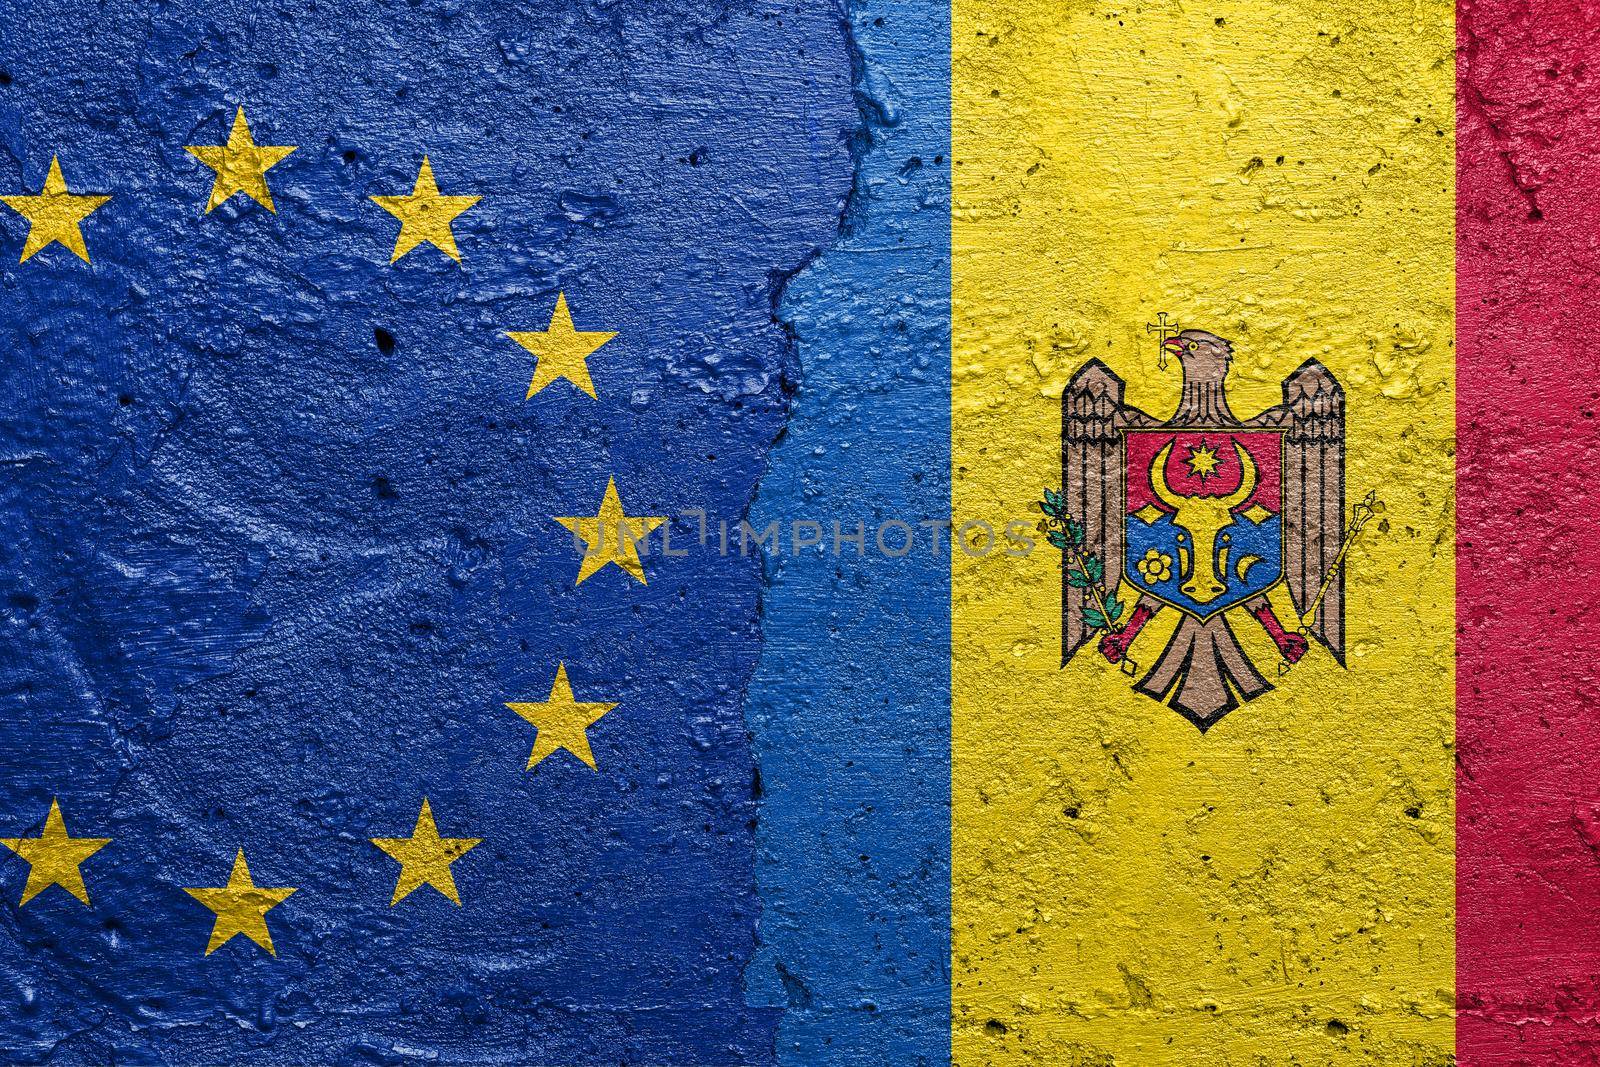 European Union and Moldova - Cracked concrete wall painted with a EU flag on the left and a Moldovan flag on the right stock photo by adamr